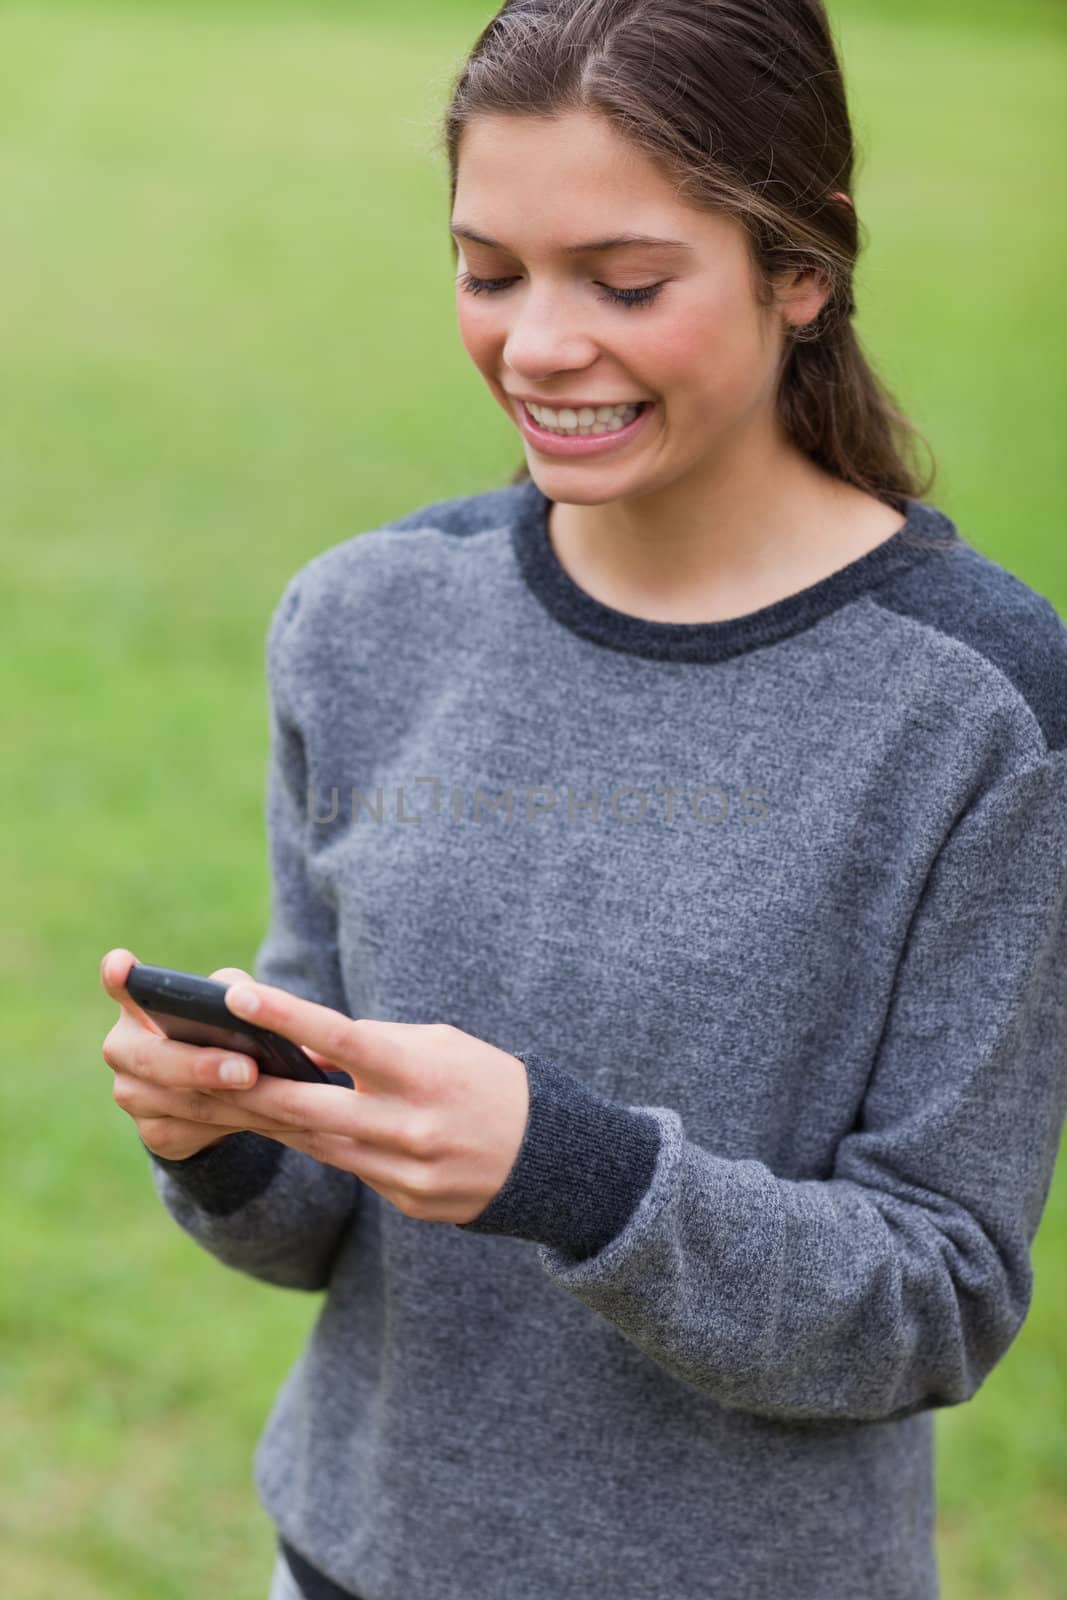 Young girl showing a beaming smile while sending a text by Wavebreakmedia